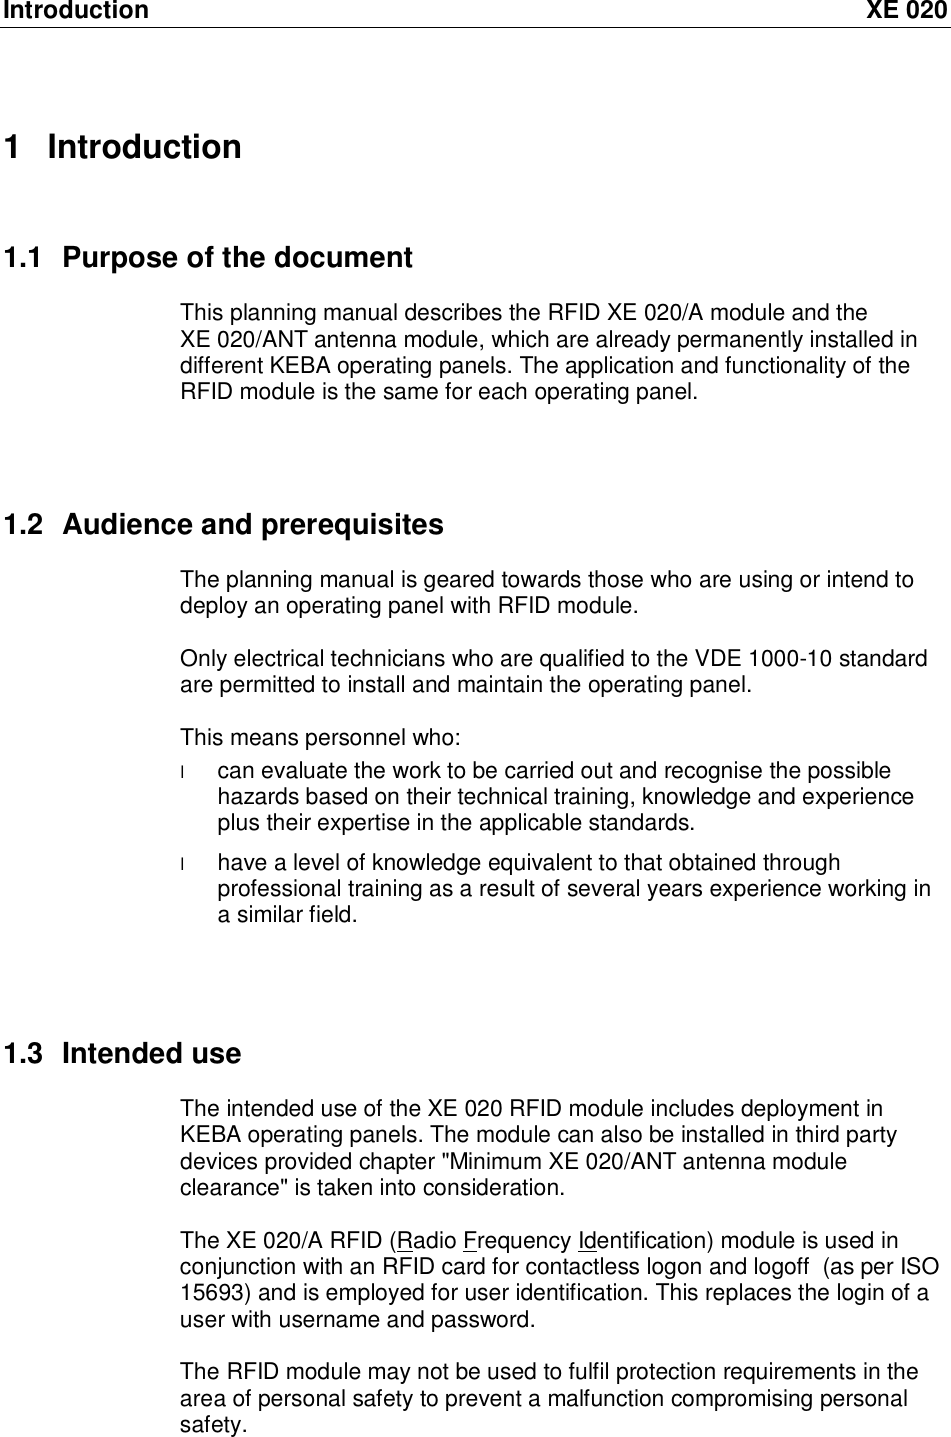 Introduction XE 020 1 Introduction 1.1 Purpose of the document This planning manual describes the RFID XE 020/A module and the XE 020/ANT antenna module, which are already permanently installed in different KEBA operating panels. The application and functionality of the RFID module is the same for each operating panel.    1.2 Audience and prerequisites The planning manual is geared towards those who are using or intend to deploy an operating panel with RFID module.  Only electrical technicians who are qualified to the VDE 1000-10 standard are permitted to install and maintain the operating panel.  This means personnel who:  l can evaluate the work to be carried out and recognise the possible hazards based on their technical training, knowledge and experience plus their expertise in the applicable standards. l have a level of knowledge equivalent to that obtained through professional training as a result of several years experience working in a similar field.    1.3 Intended use The intended use of the XE 020 RFID module includes deployment in KEBA operating panels. The module can also be installed in third party devices provided chapter &quot;Minimum XE 020/ANT antenna module clearance&quot; is taken into consideration.  The XE 020/A RFID (Radio Frequency Identification) module is used in conjunction with an RFID card for contactless logon and logoff  (as per ISO 15693) and is employed for user identification. This replaces the login of a user with username and password.  The RFID module may not be used to fulfil protection requirements in the area of personal safety to prevent a malfunction compromising personal safety.    